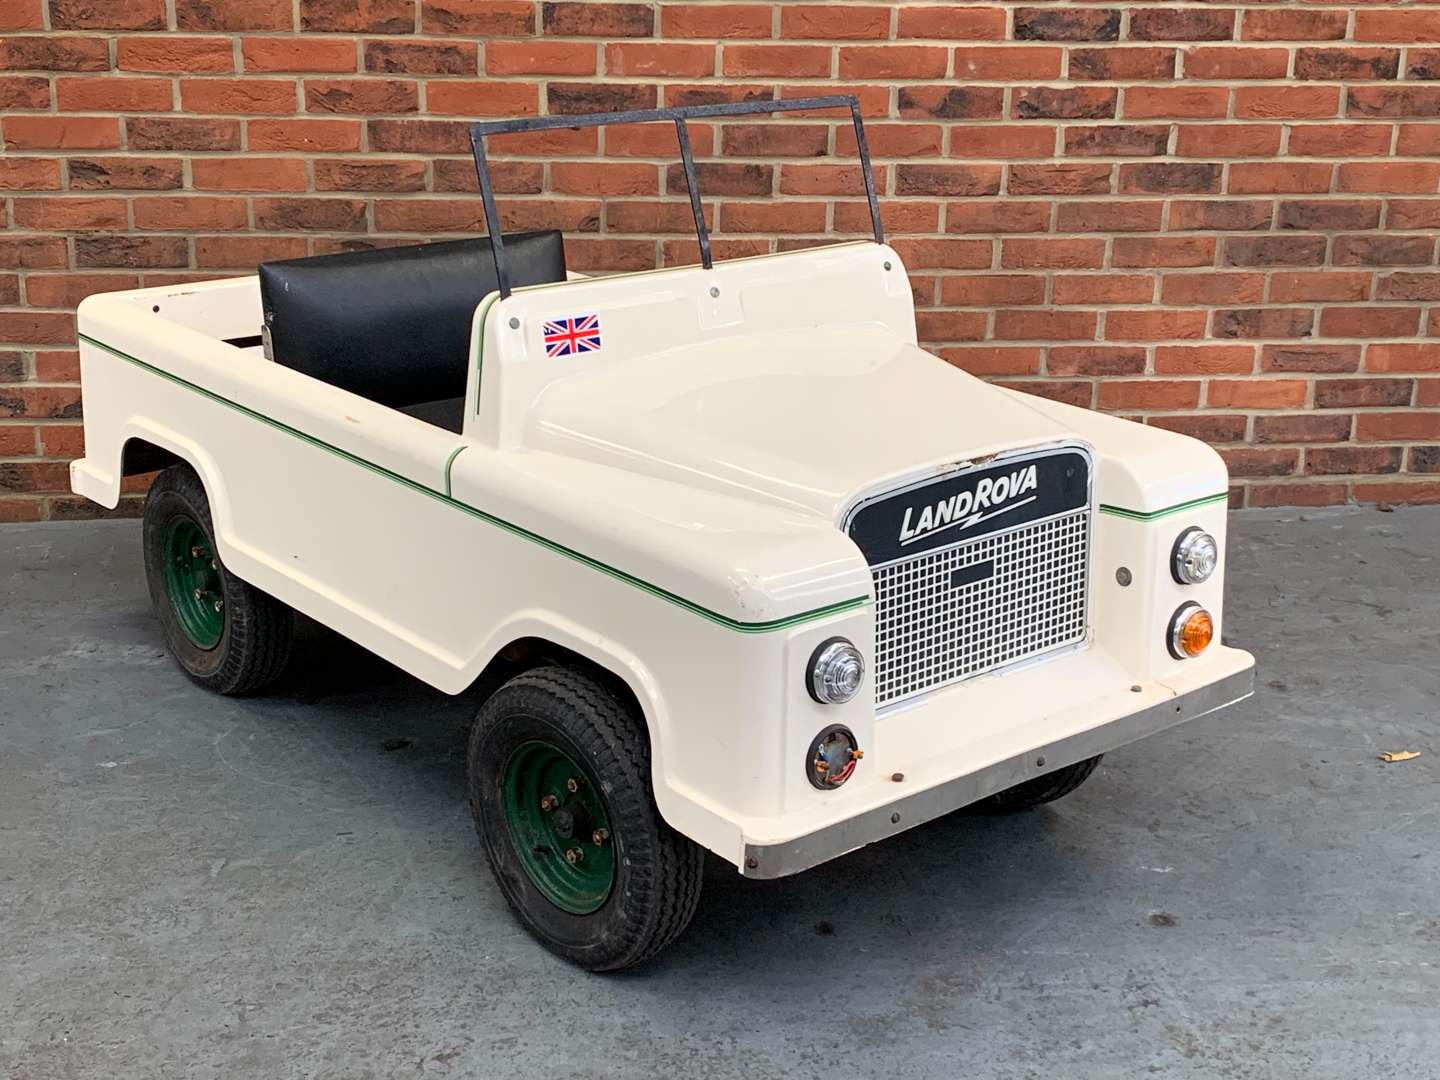 <p>Childs Petrol Powered Land Rover</p>